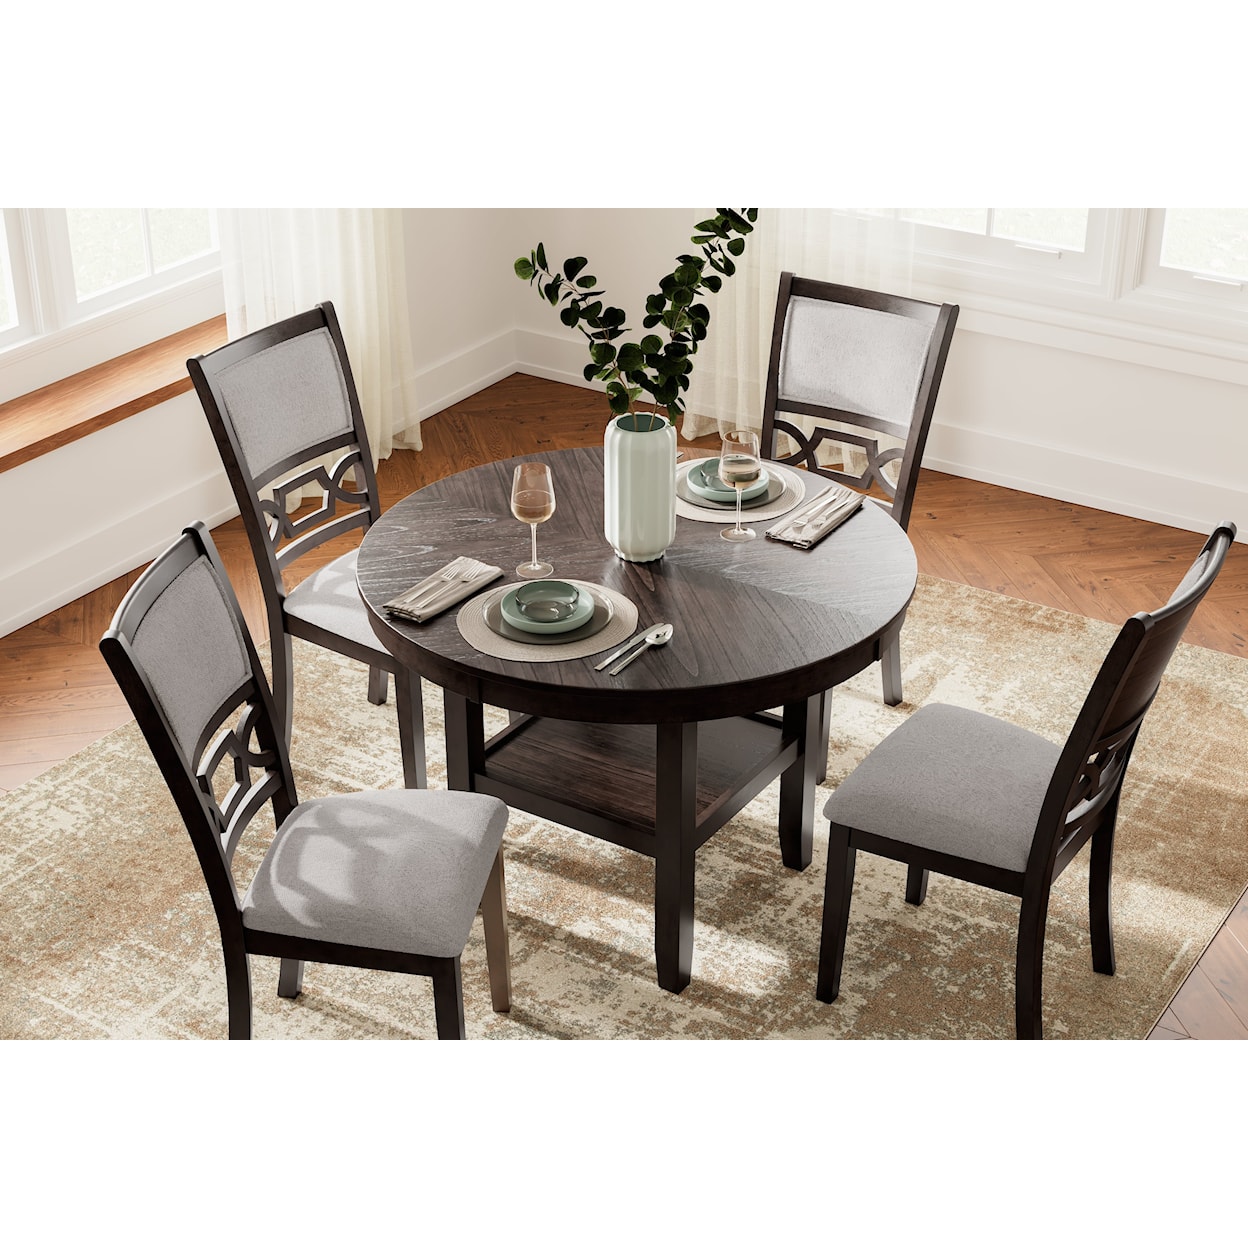 Benchcraft Langwest Dining Room Table Set